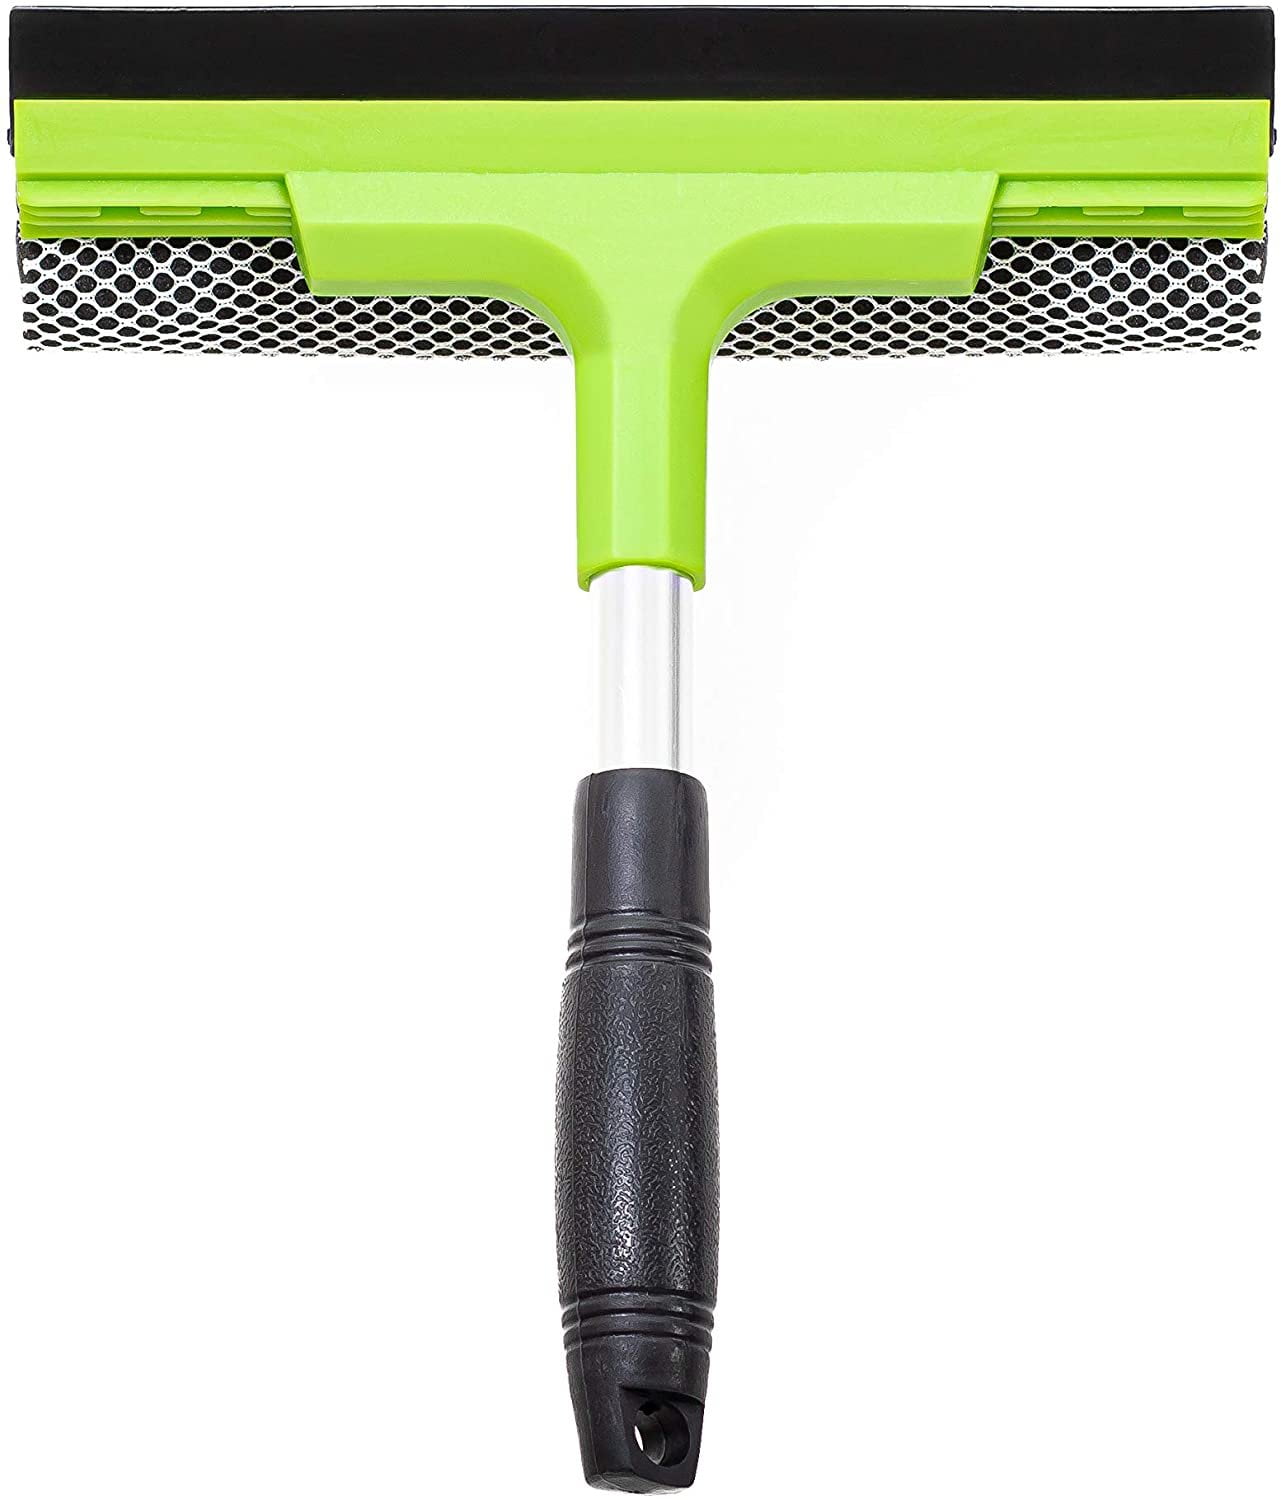 Window Squeegee Cleaning Tool  Squeegee Cleaner for Windows